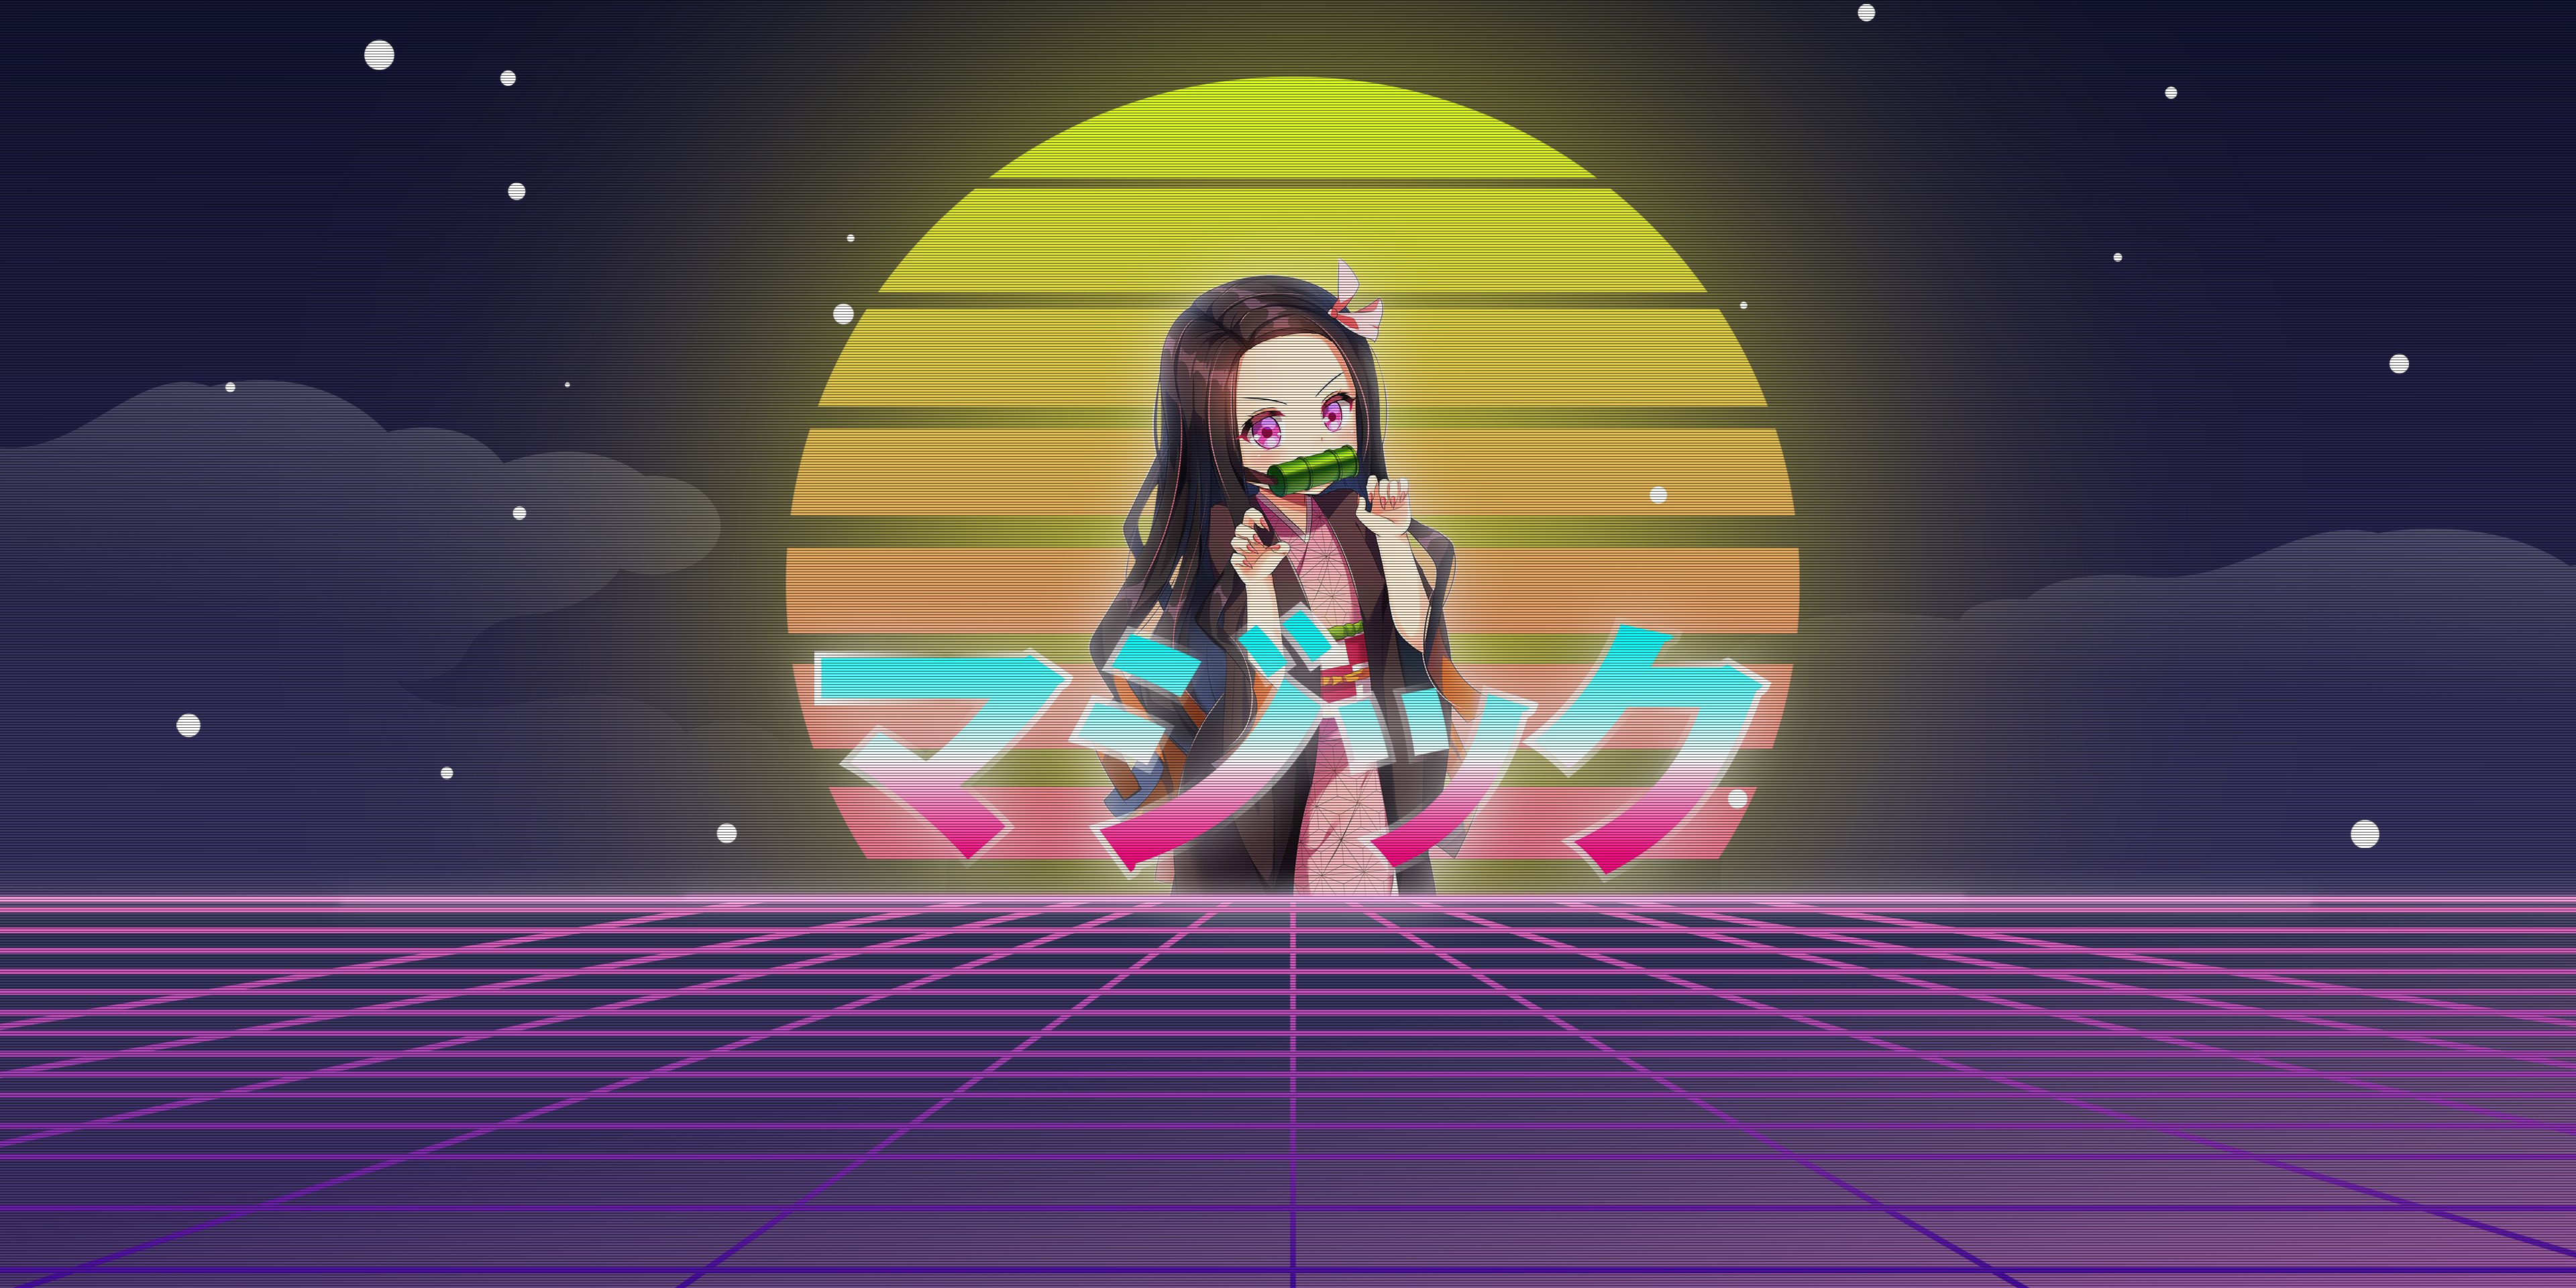 A woman with long hair and glasses is standing in front of an orange background - Vaporwave